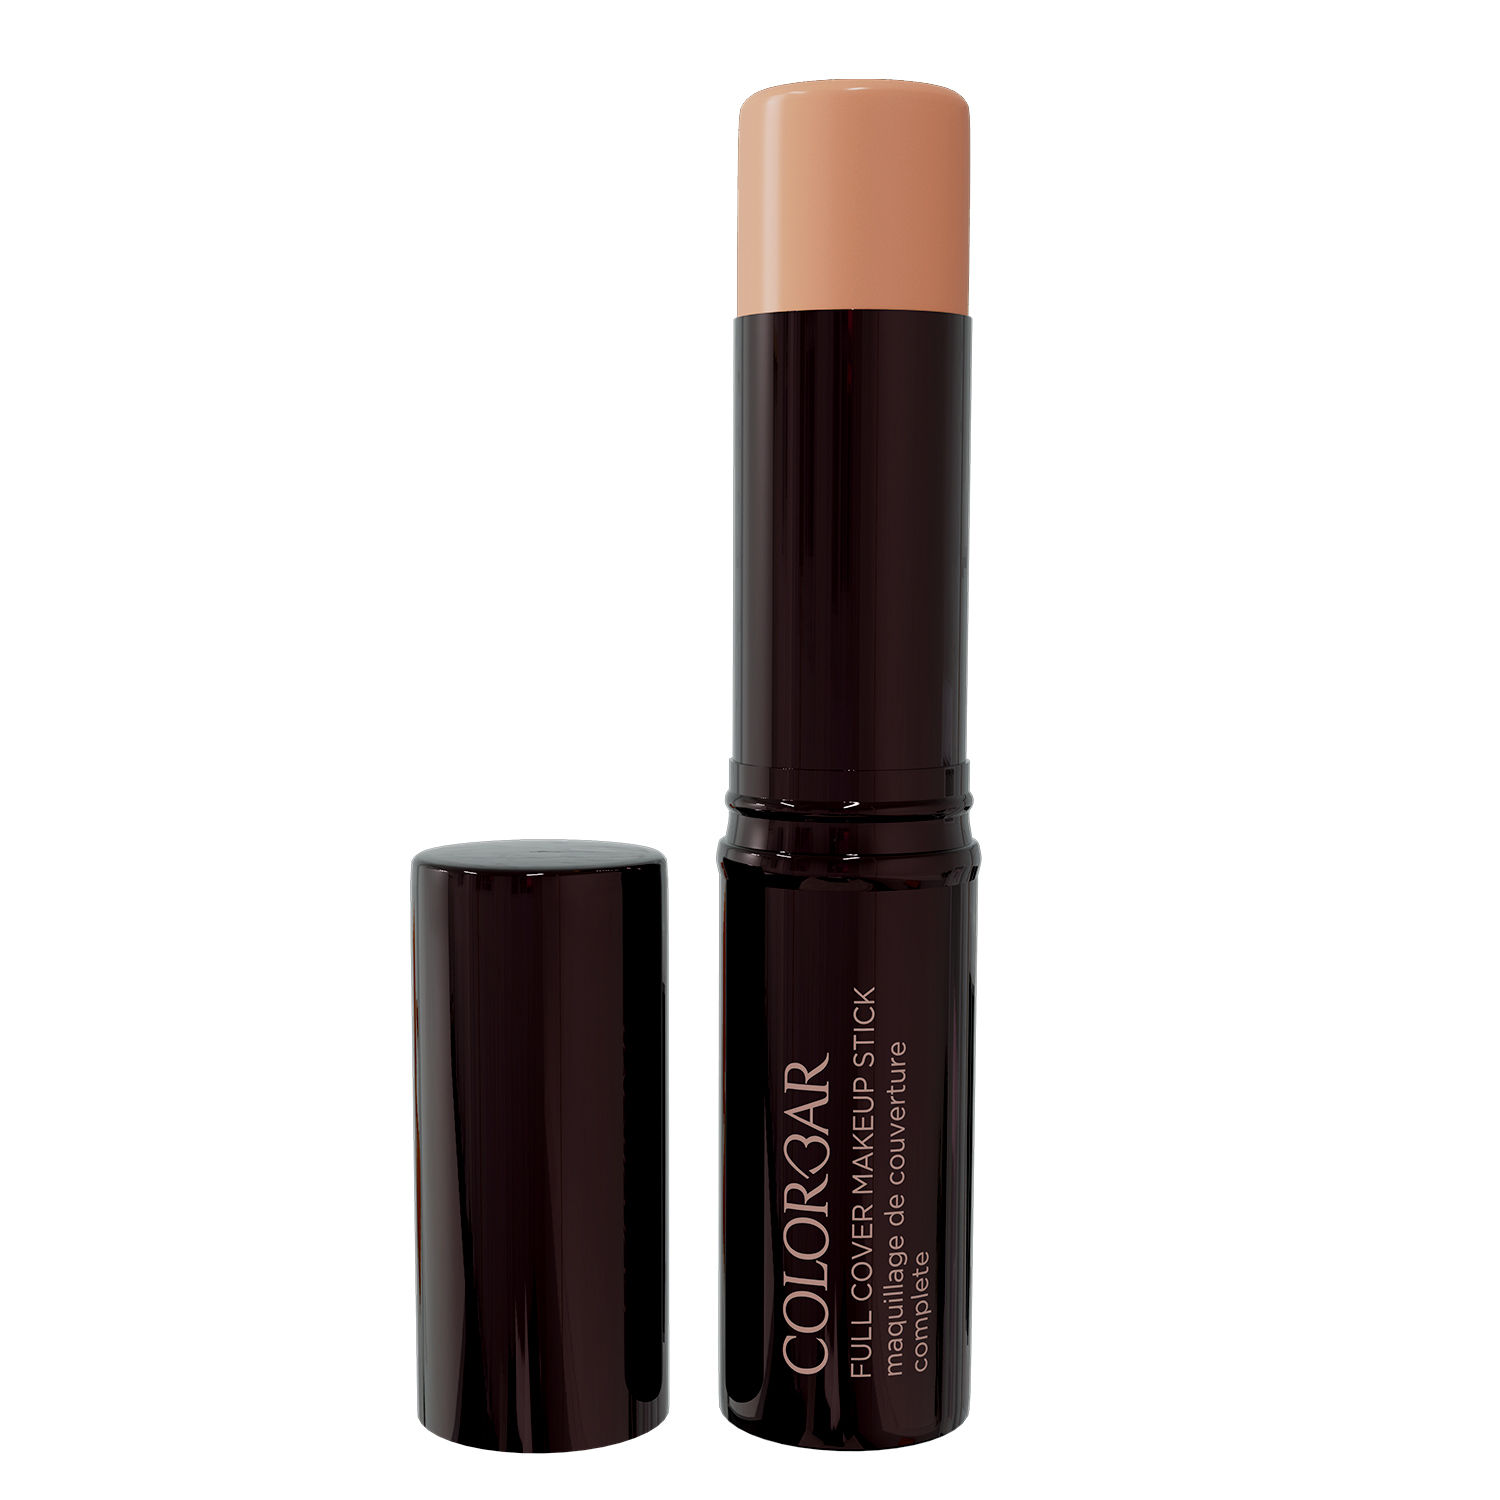 Buy Colorbar Full Cover Makeup Stick With SPF 30 Au Natural 002 (9 g) - Purplle